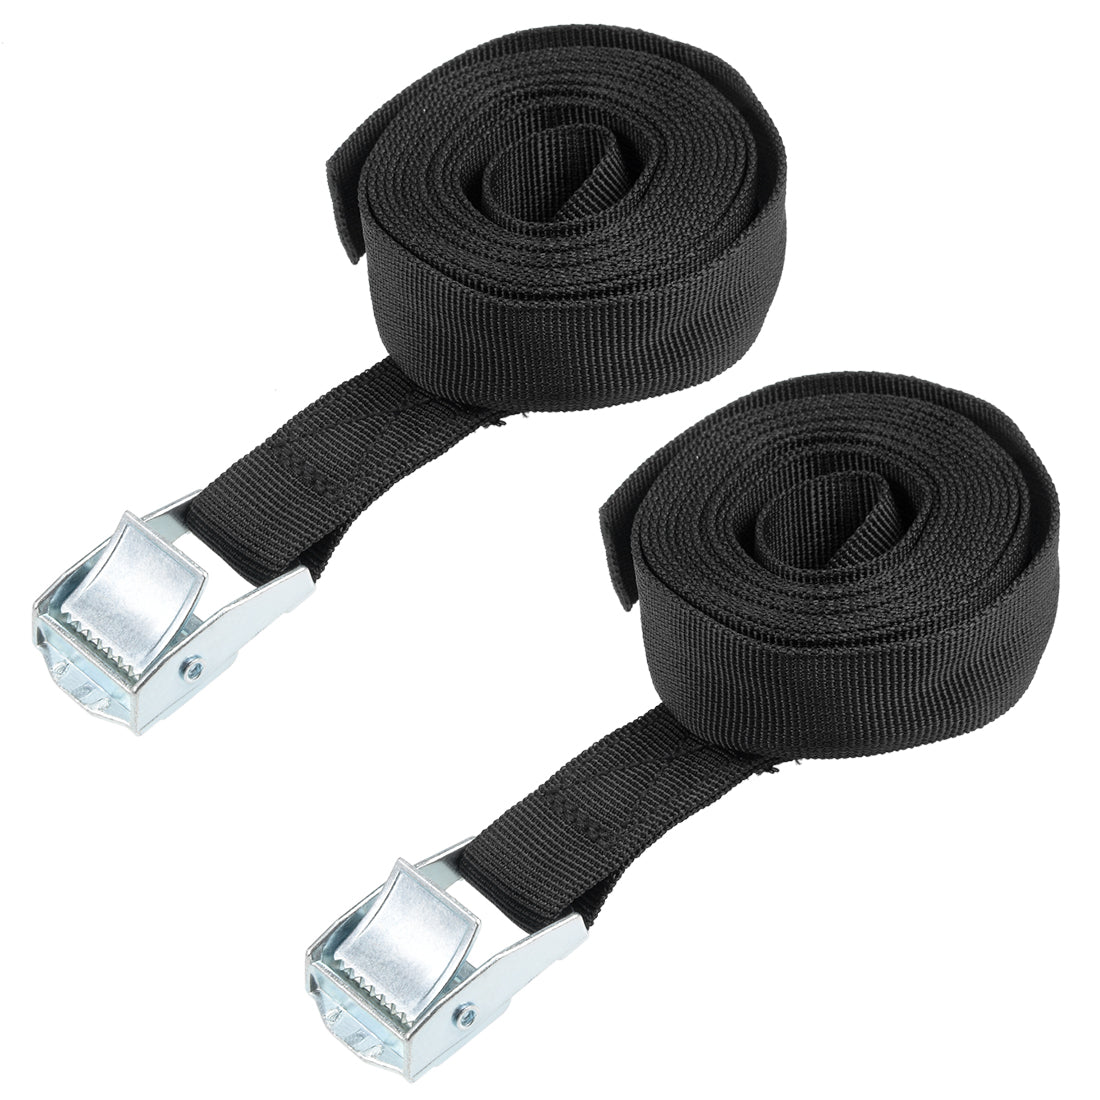 uxcell Uxcell 2.5M x 25mm Lashing Strap Cargo Tie Down Straps Buckle Up to 80Kg, Black, 2Pcs